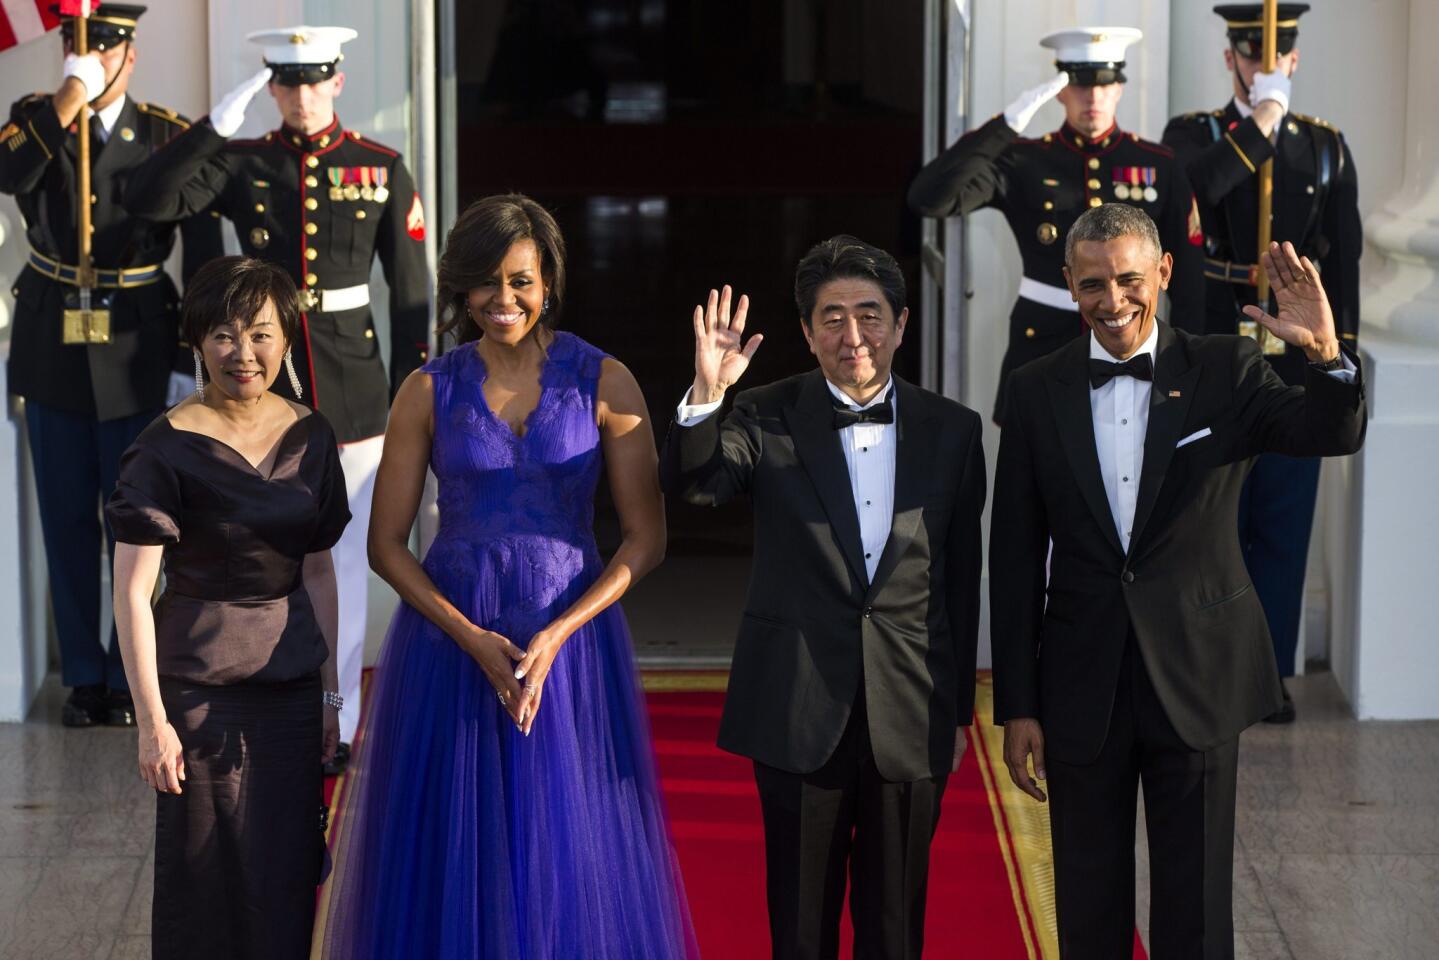 Michelle Obama dons a rich purple gown by Japanese-born designer Tadashi Shoji at Tuesday night's state dinner for Japan honoring Prime Minister Shinzo Abe and his wife, Akie.